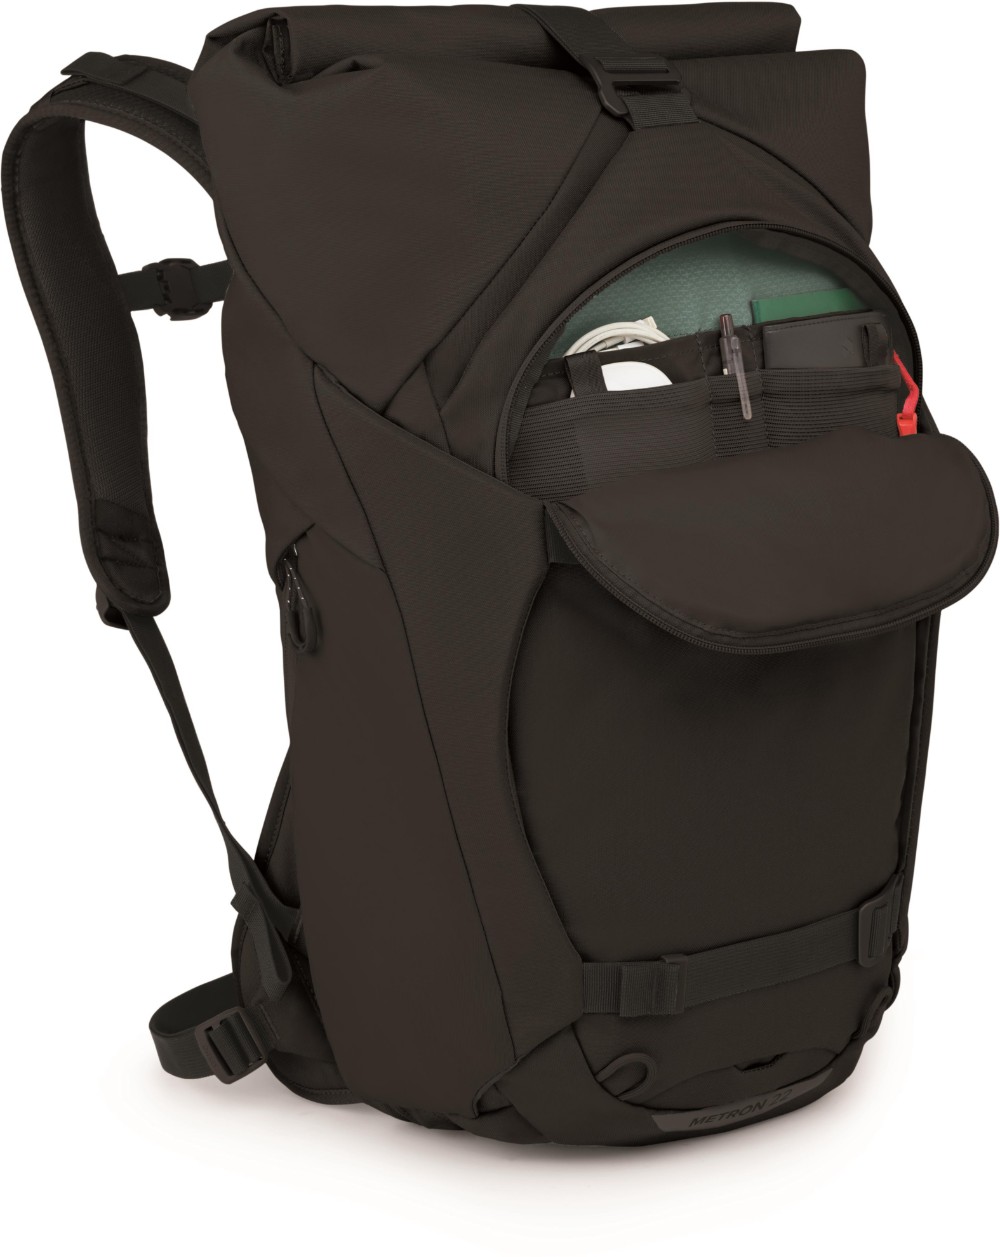 Metron 22 Roll Top Backpack image 2